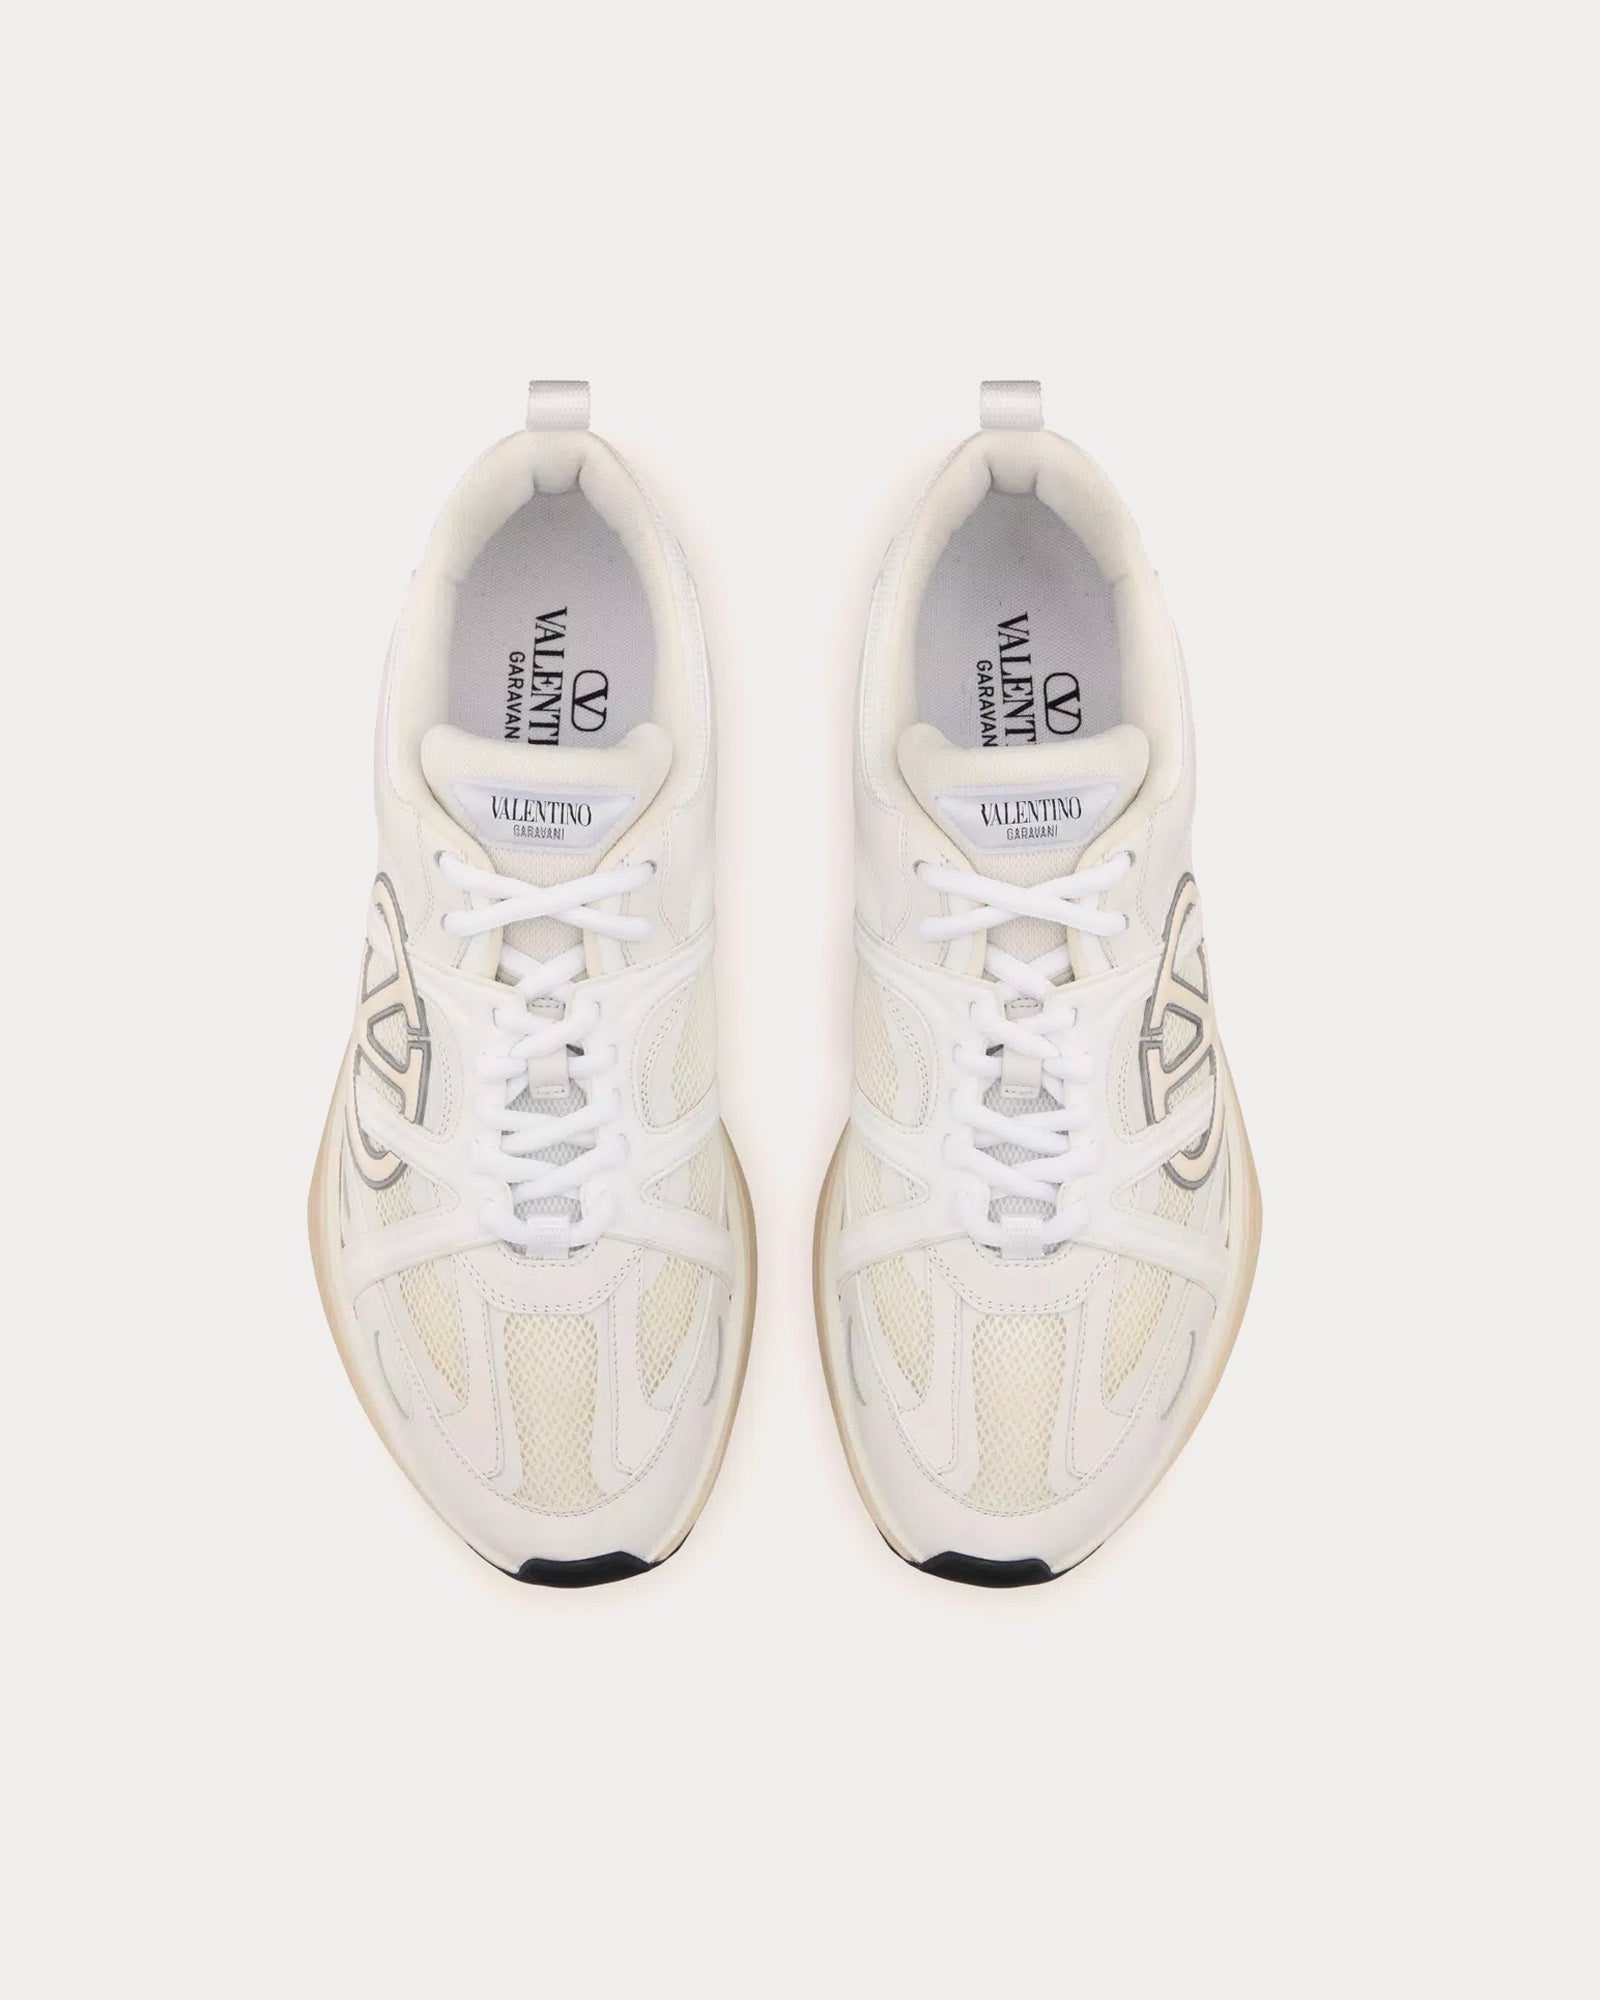 Valentino - Vlogo Easyjog Calfskin & Fabric White / Ivory / Grey Low Top Sneakers